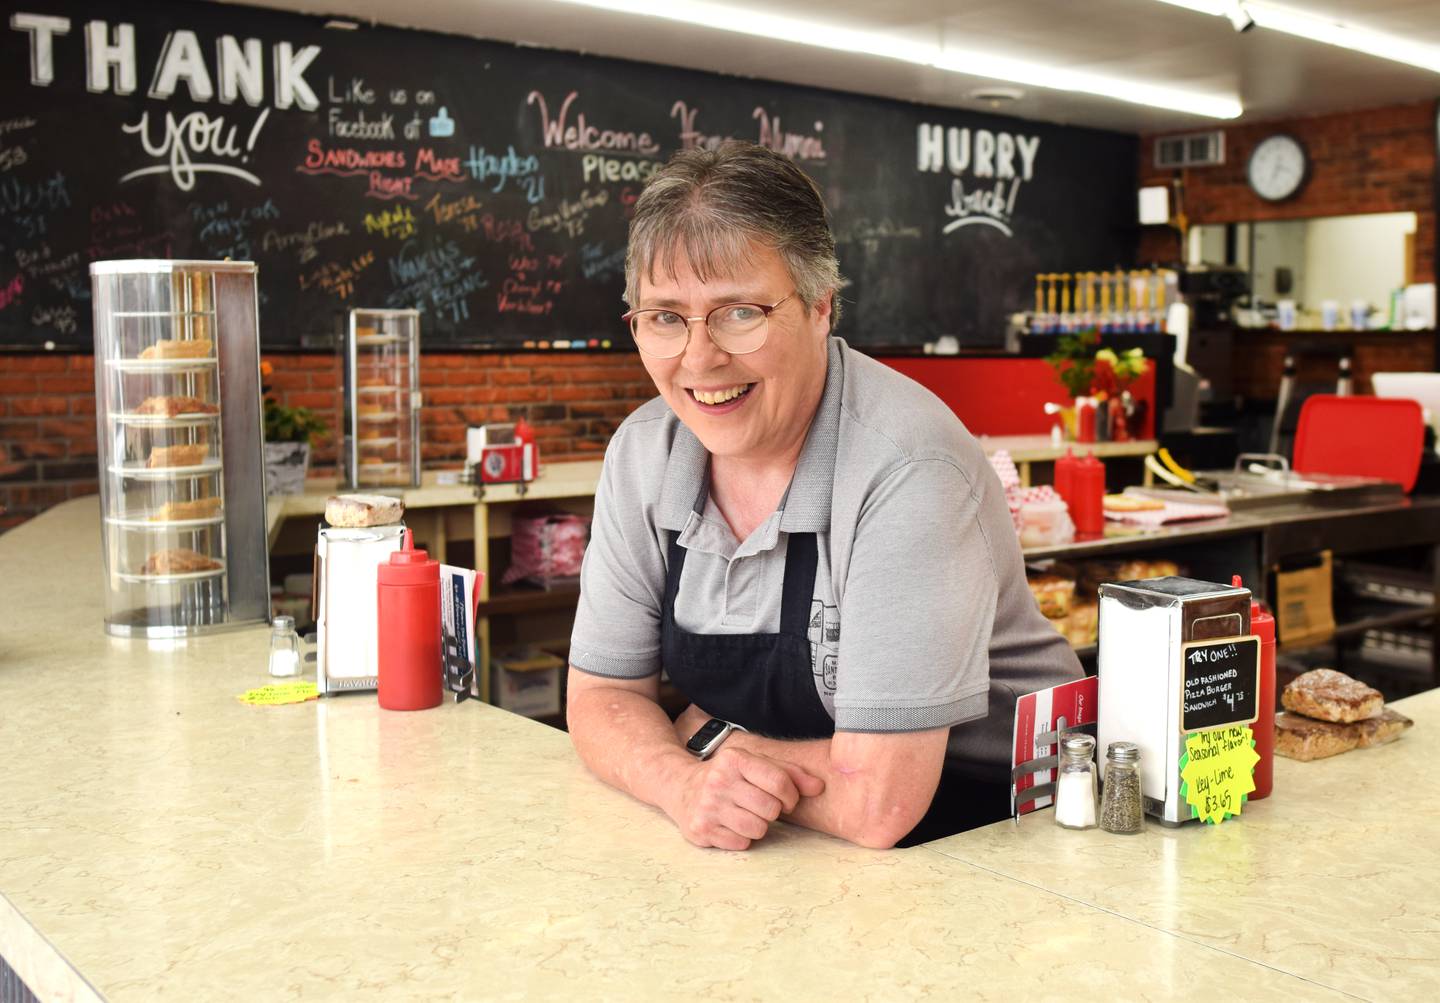 Lori Ganoe, manager of Sandwiches Made Right, has worked at the Newton restaurant for 40 years and will continue to manage it under new ownership.